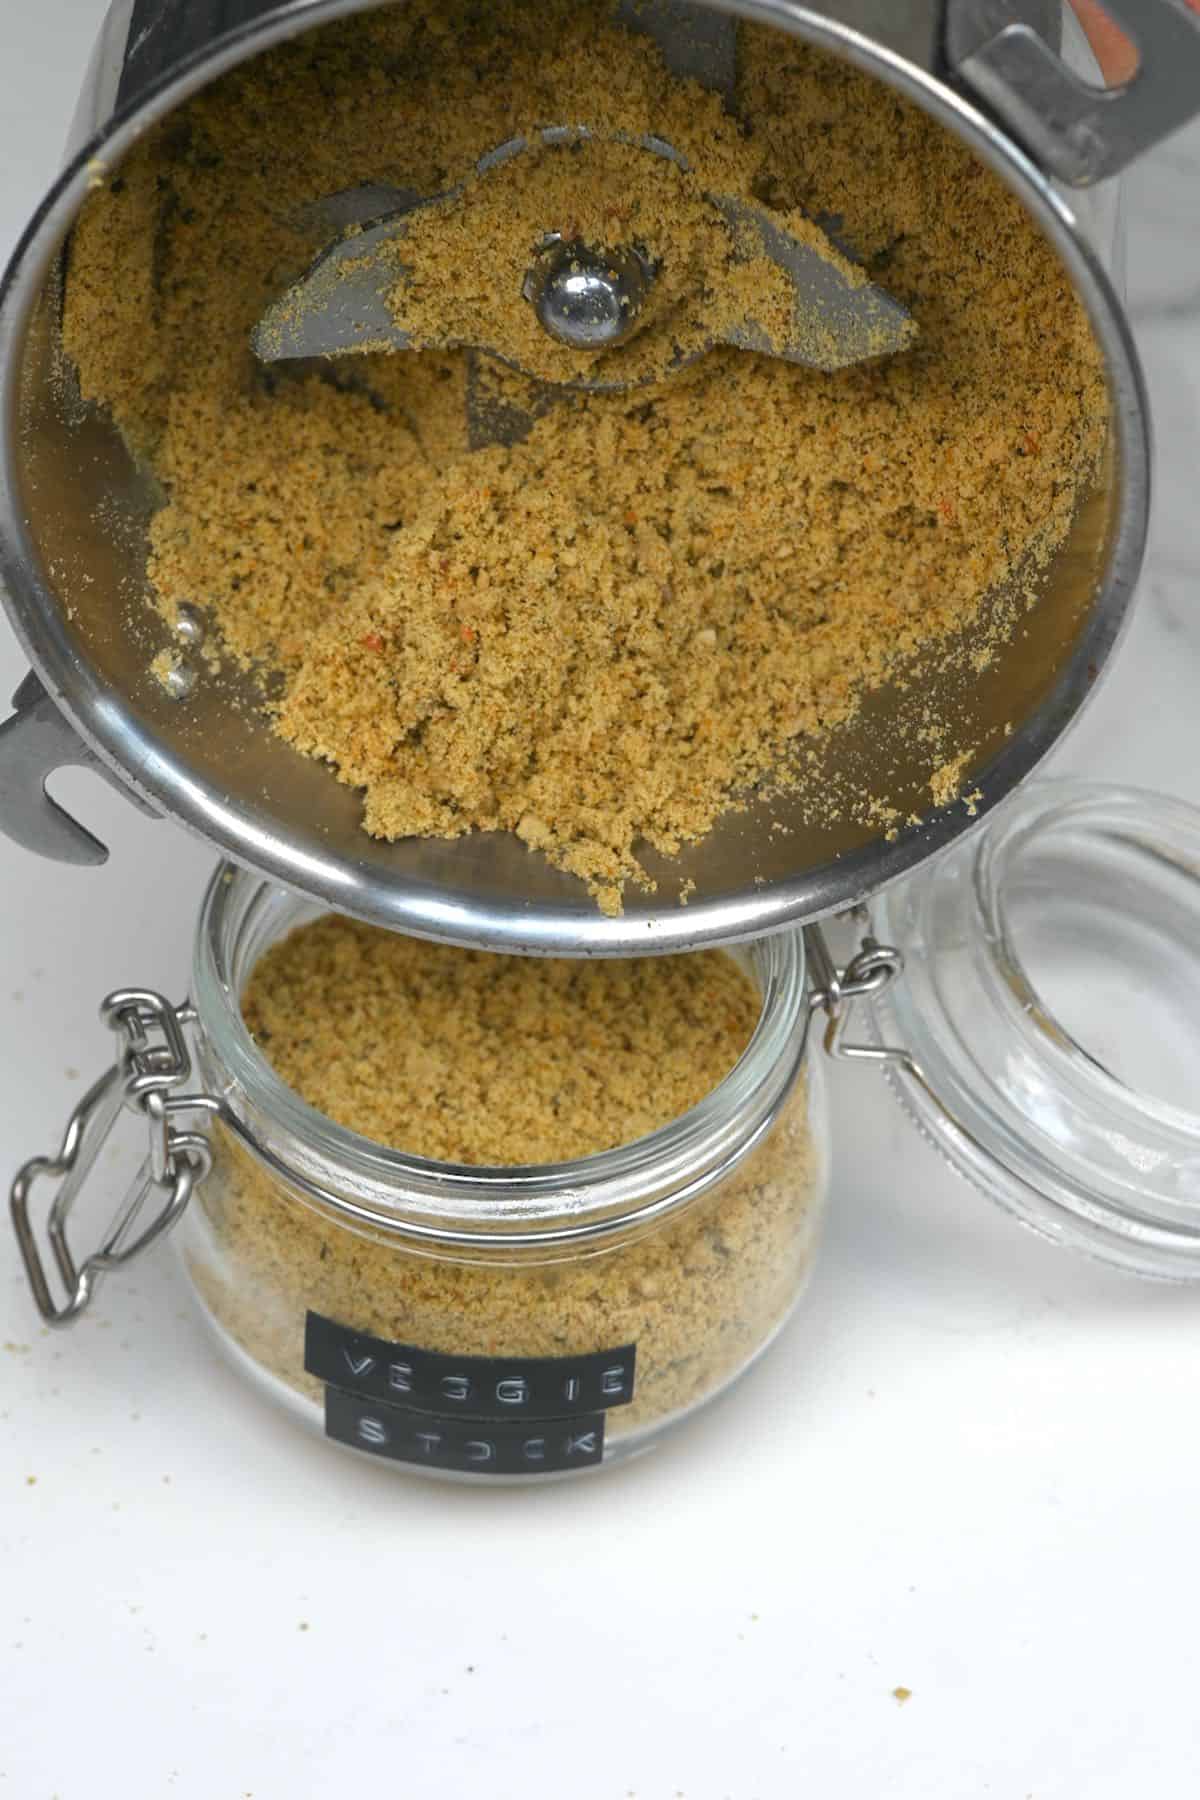 Transferring powdered vegetable stock into a jar